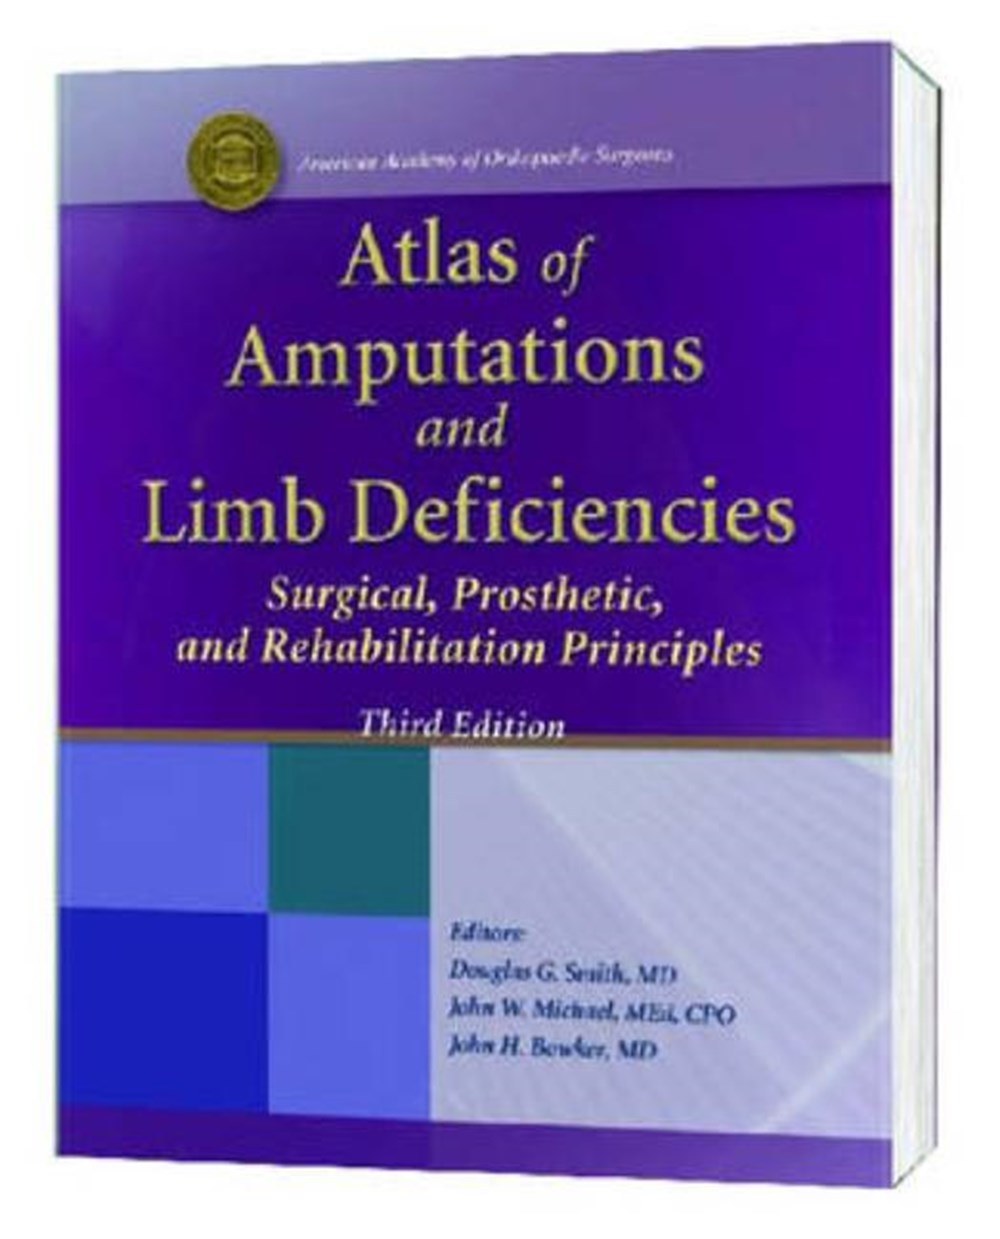 Atlas of Amputations and Limb Deficiencies Surgical, Prosthetic and Rehabilitation Principles (Revis